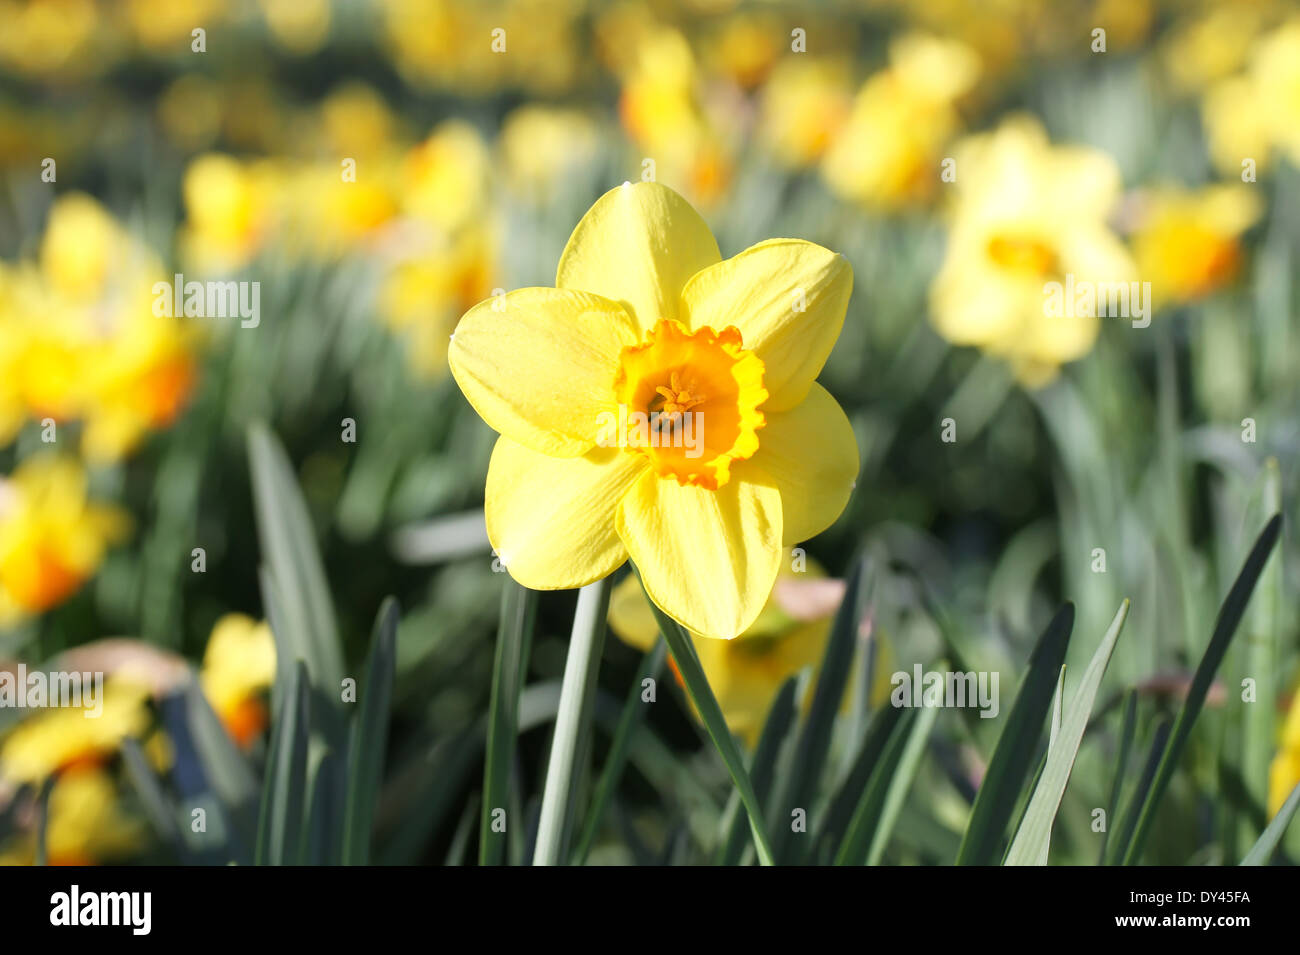 Outdoor shot of yellow daffodils in a nicely full flowerbed Stock Photo